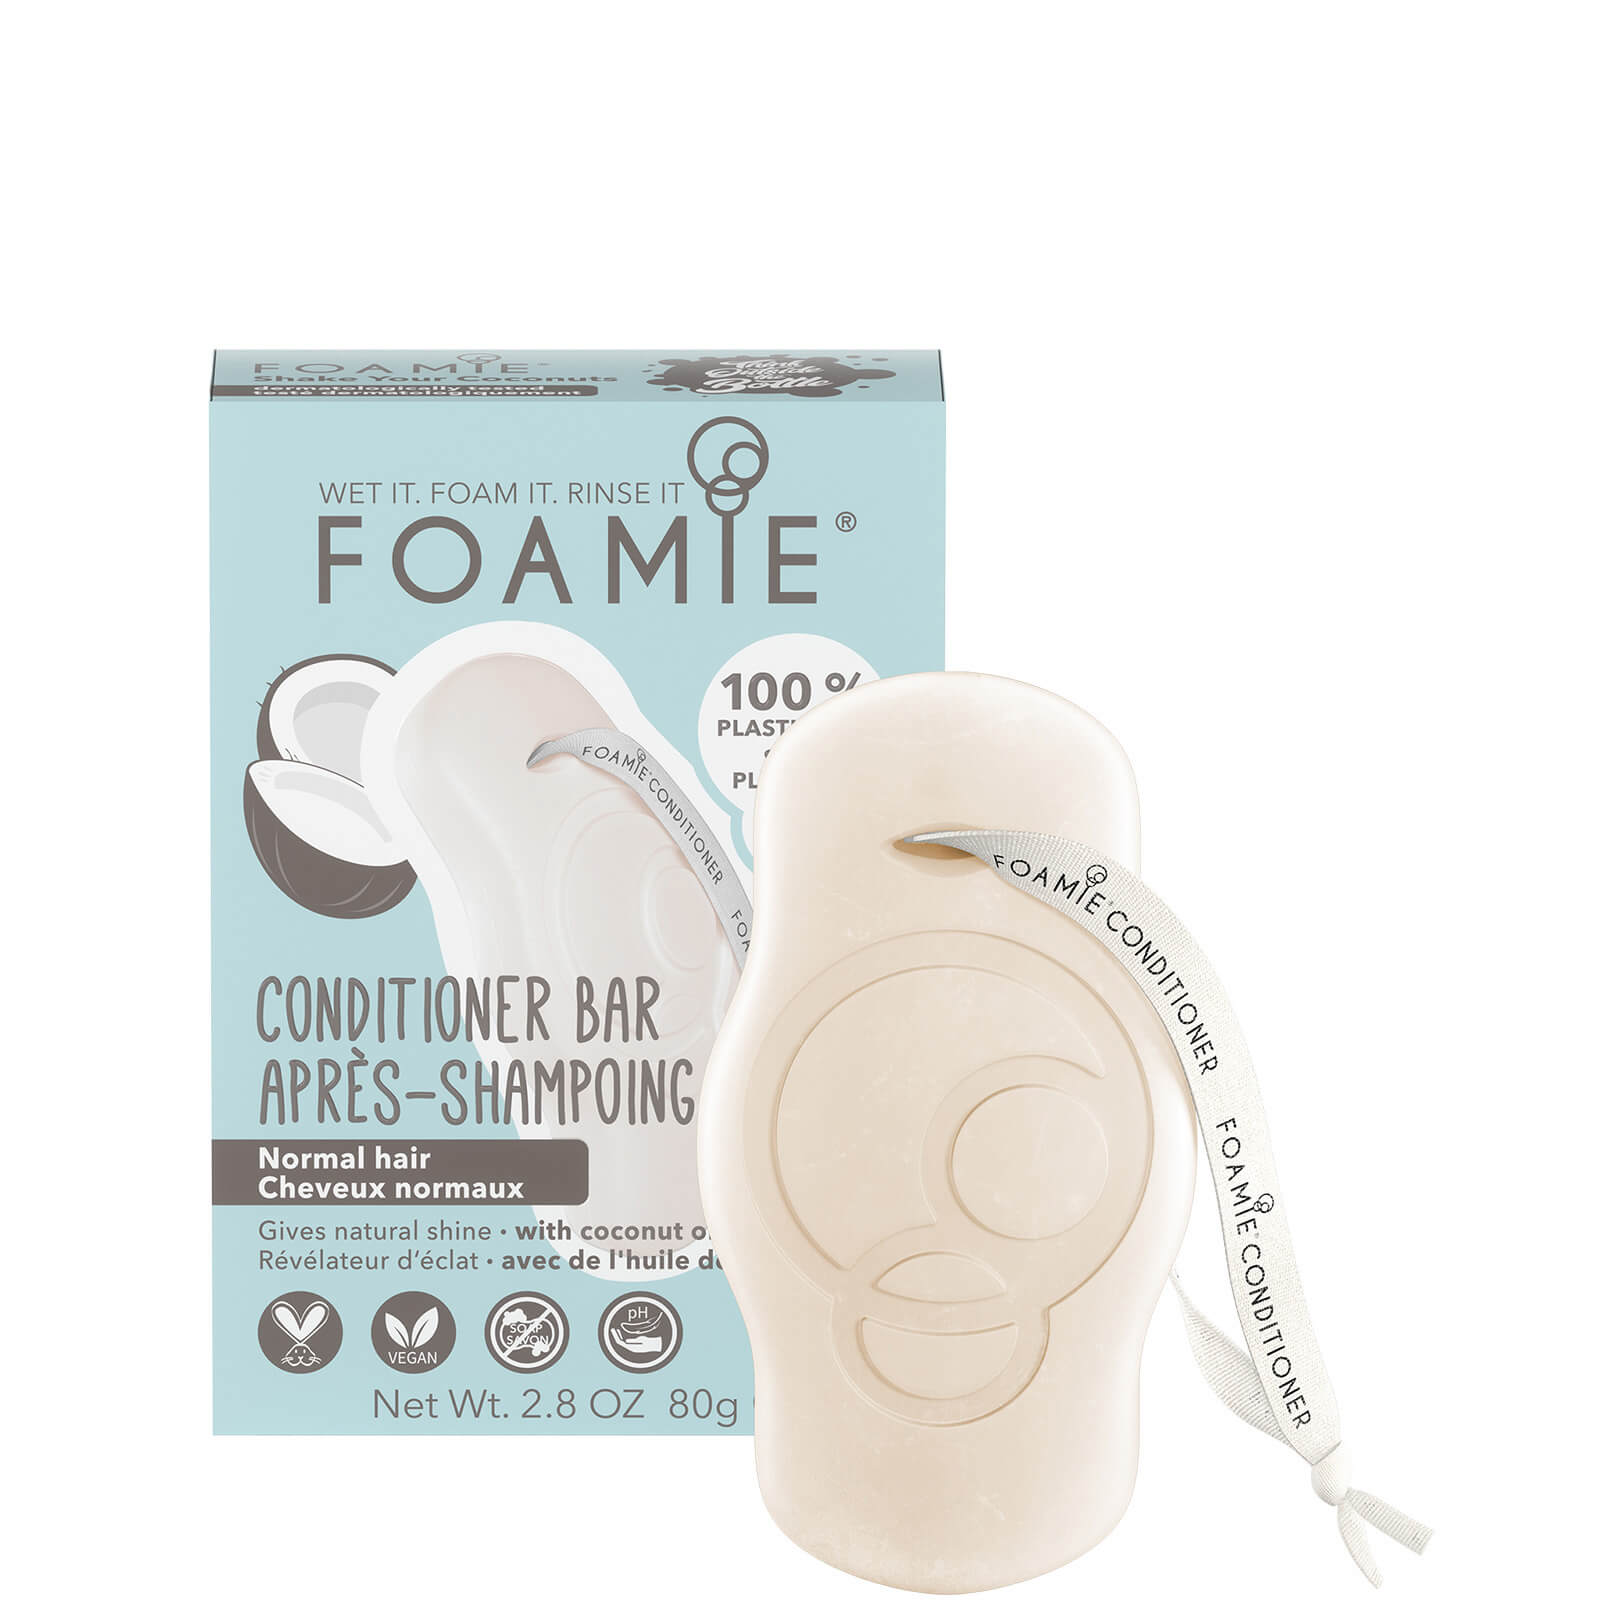 FOAMIE Conditioner Bar - Coconut for Normal Hair